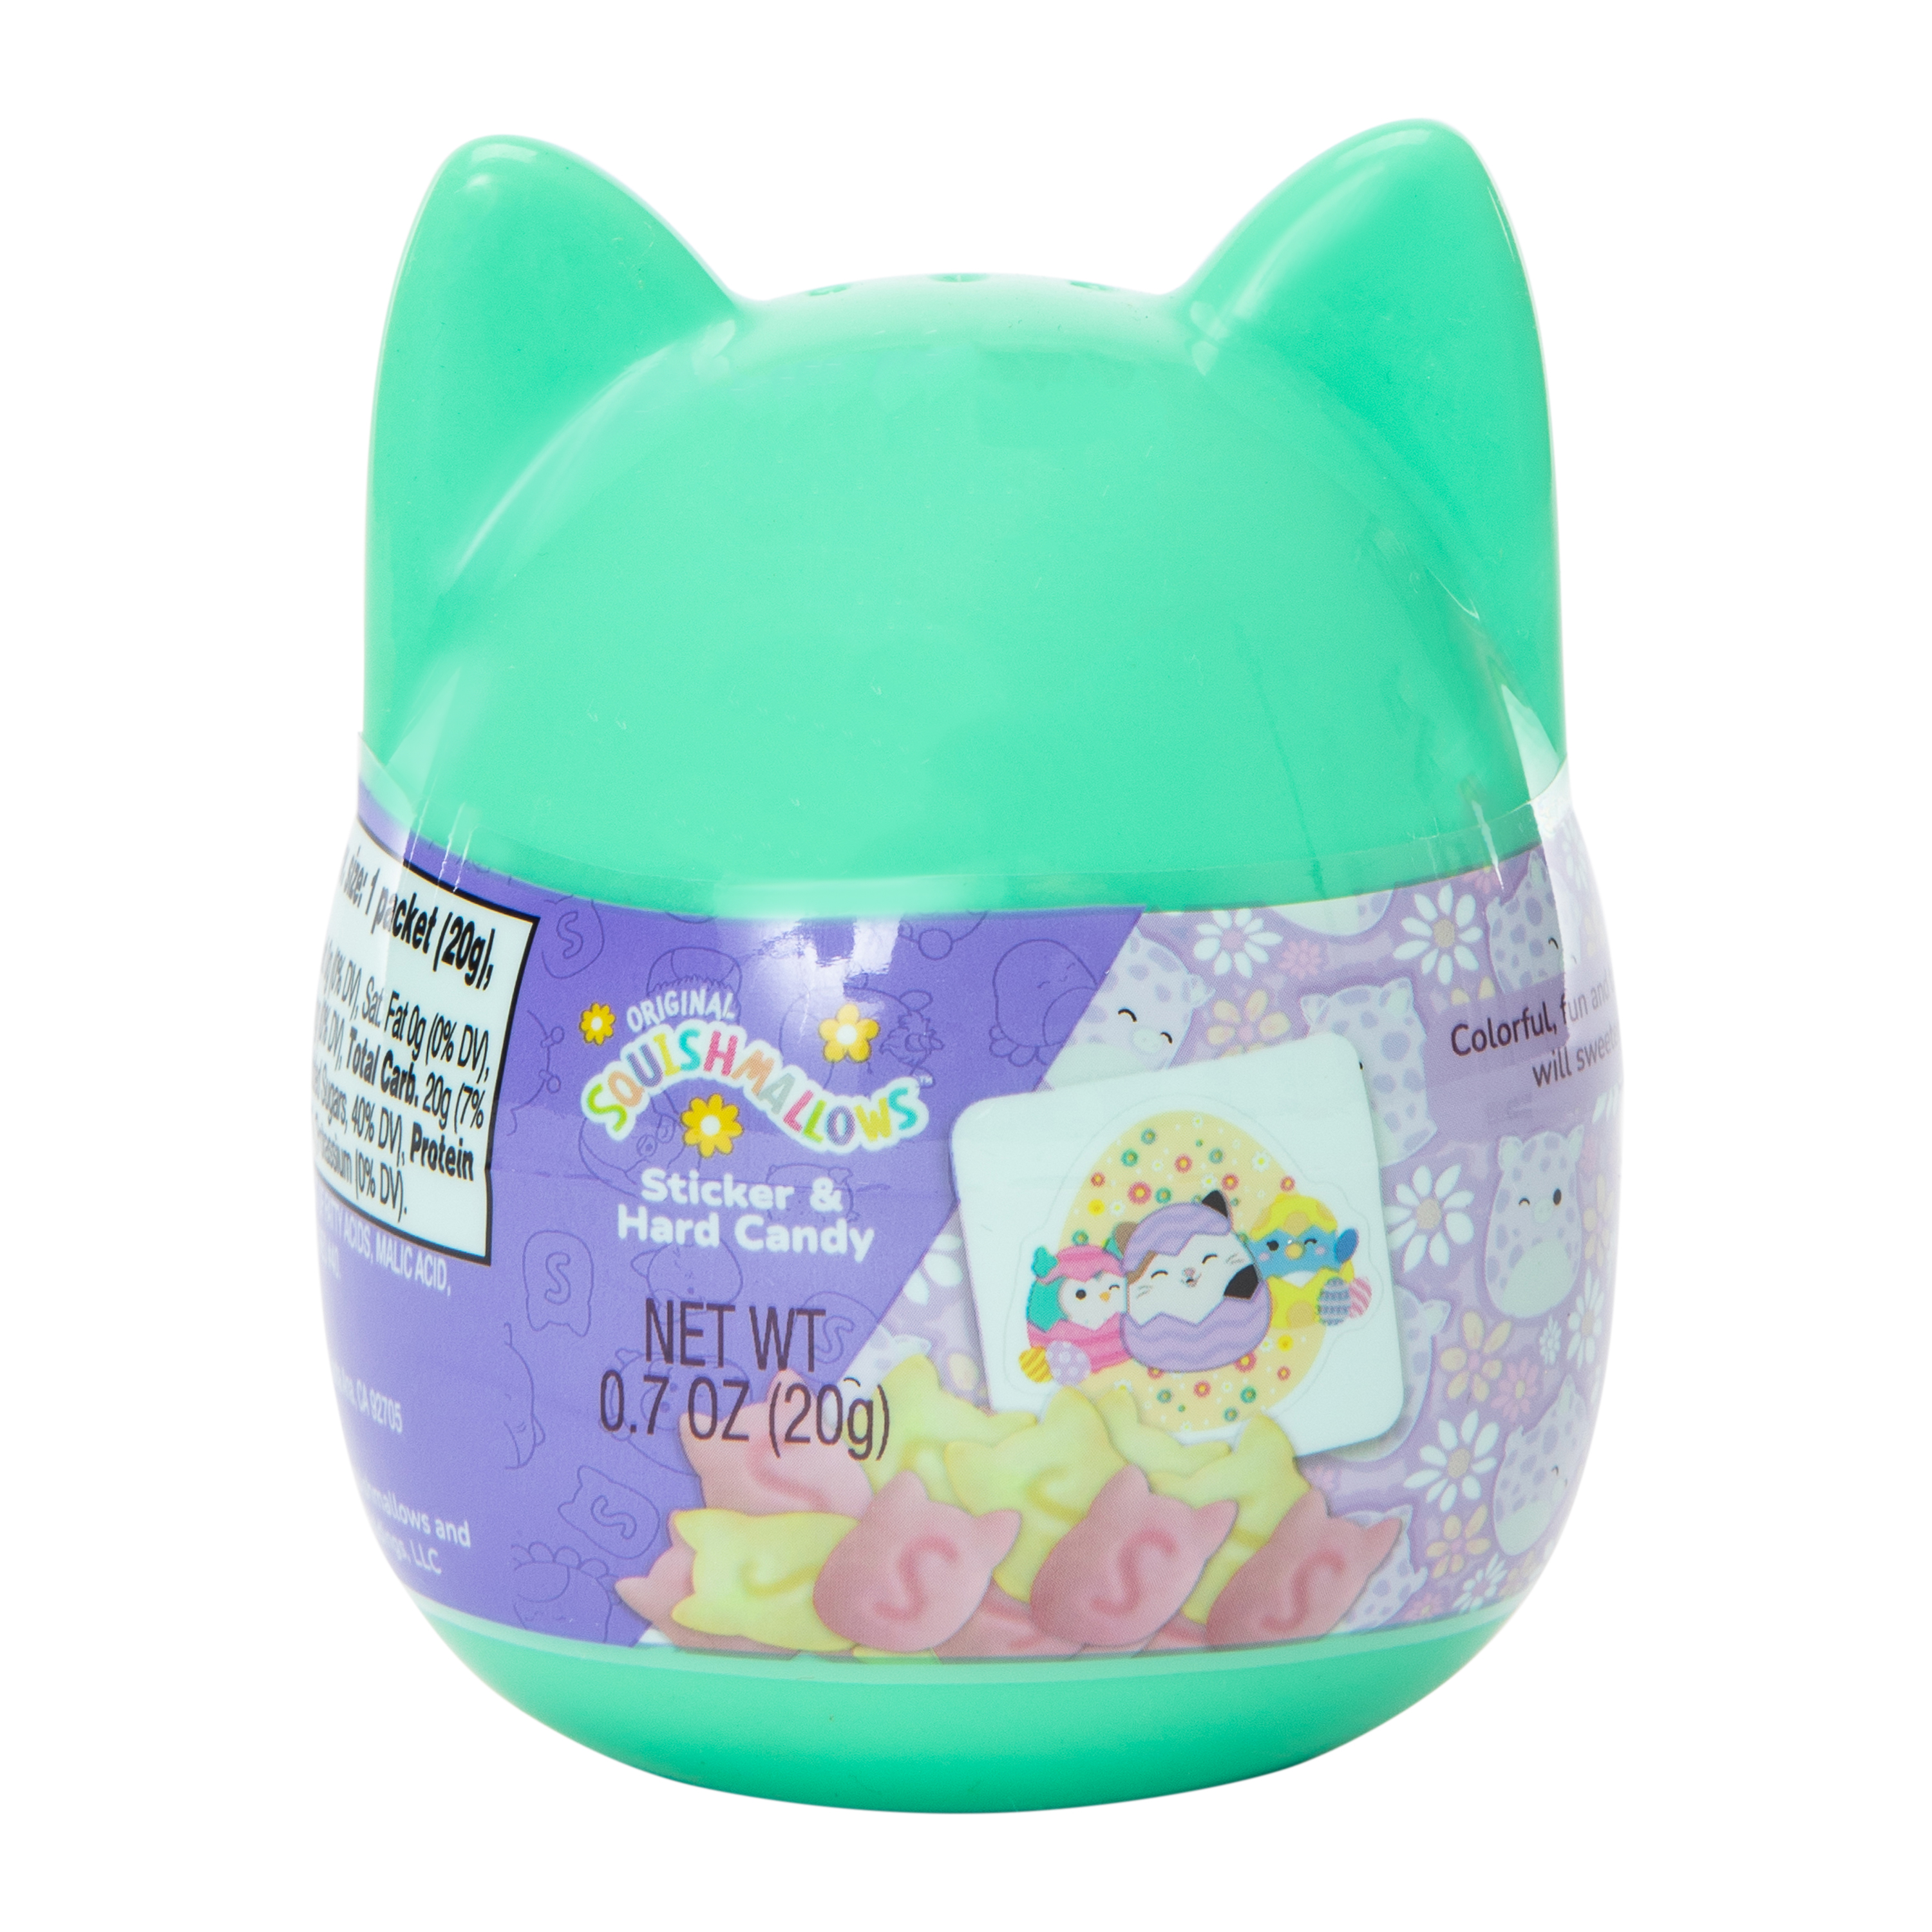 Squishmallows™ Sticker & Candy Filled Easter Egg